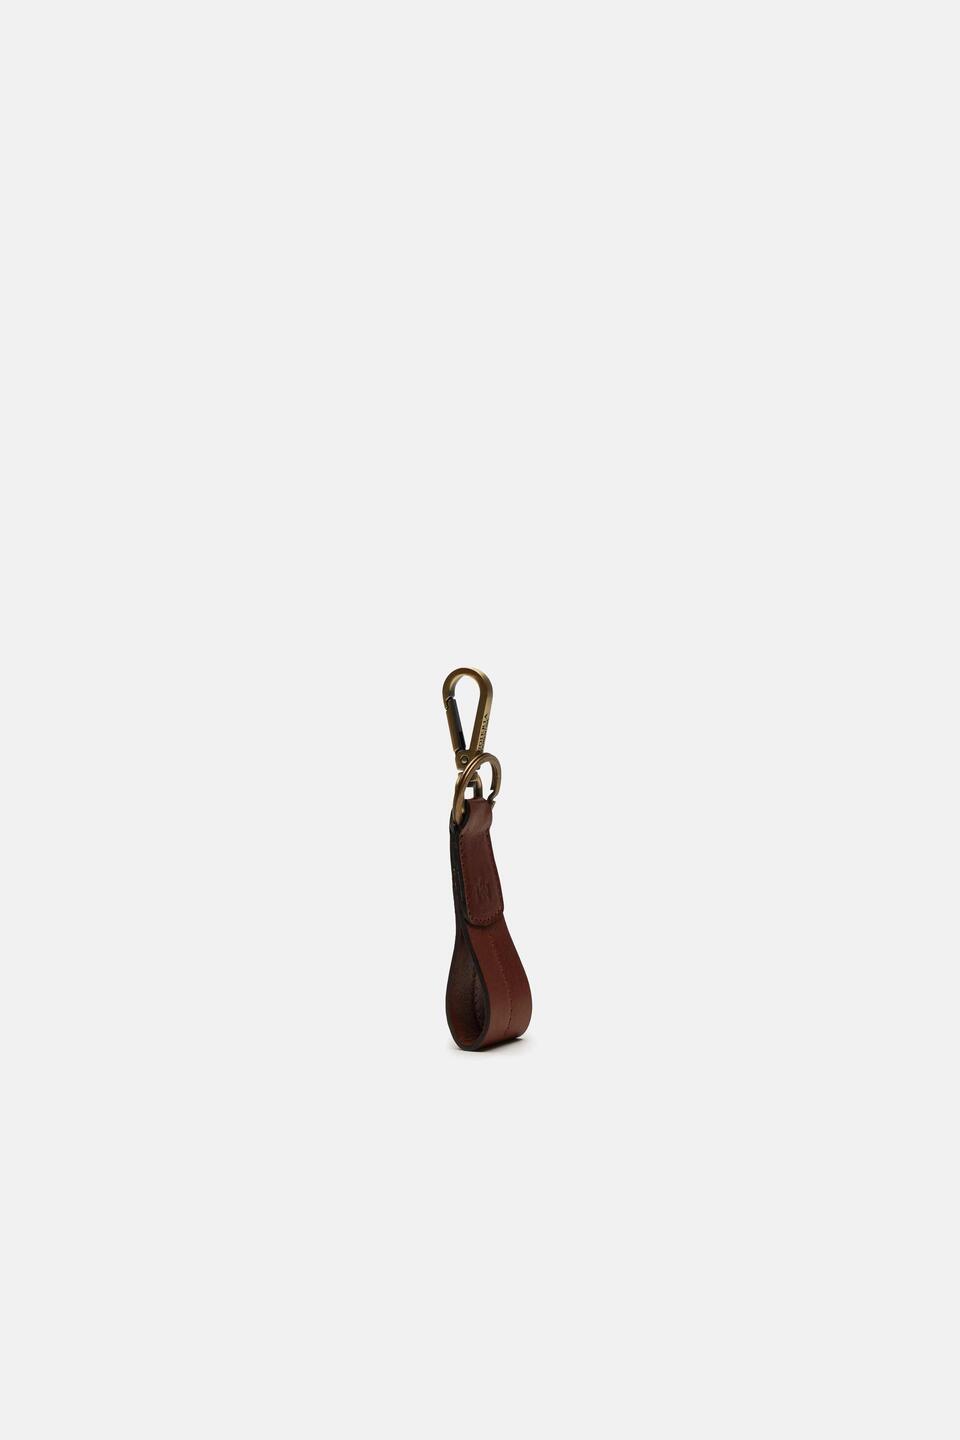 LEATHER KEYRING Brown  - Key Holders - Men's Accessories - Accessories - Cuoieria Fiorentina